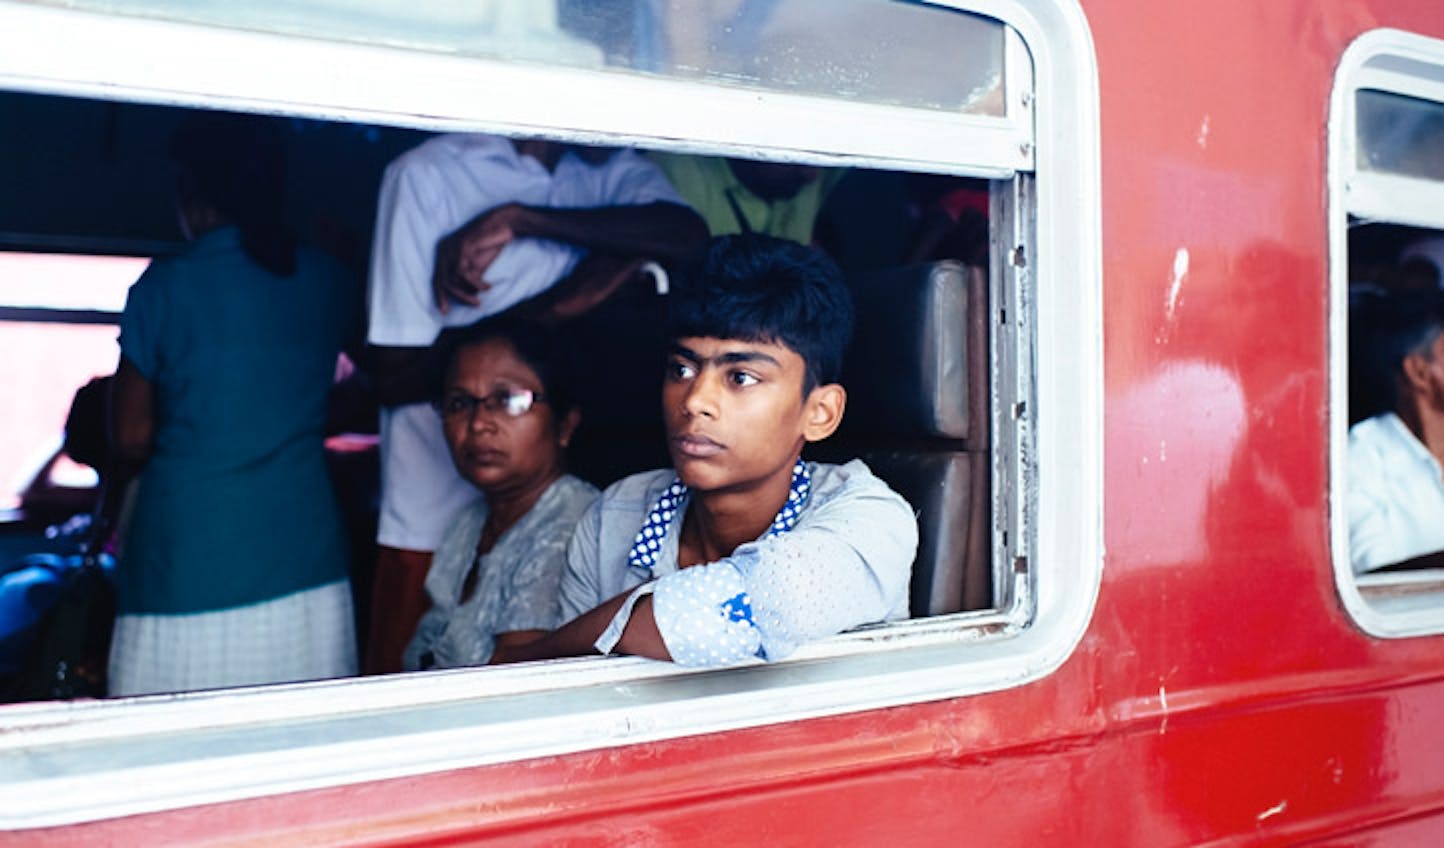 Locals on a train from Colombo